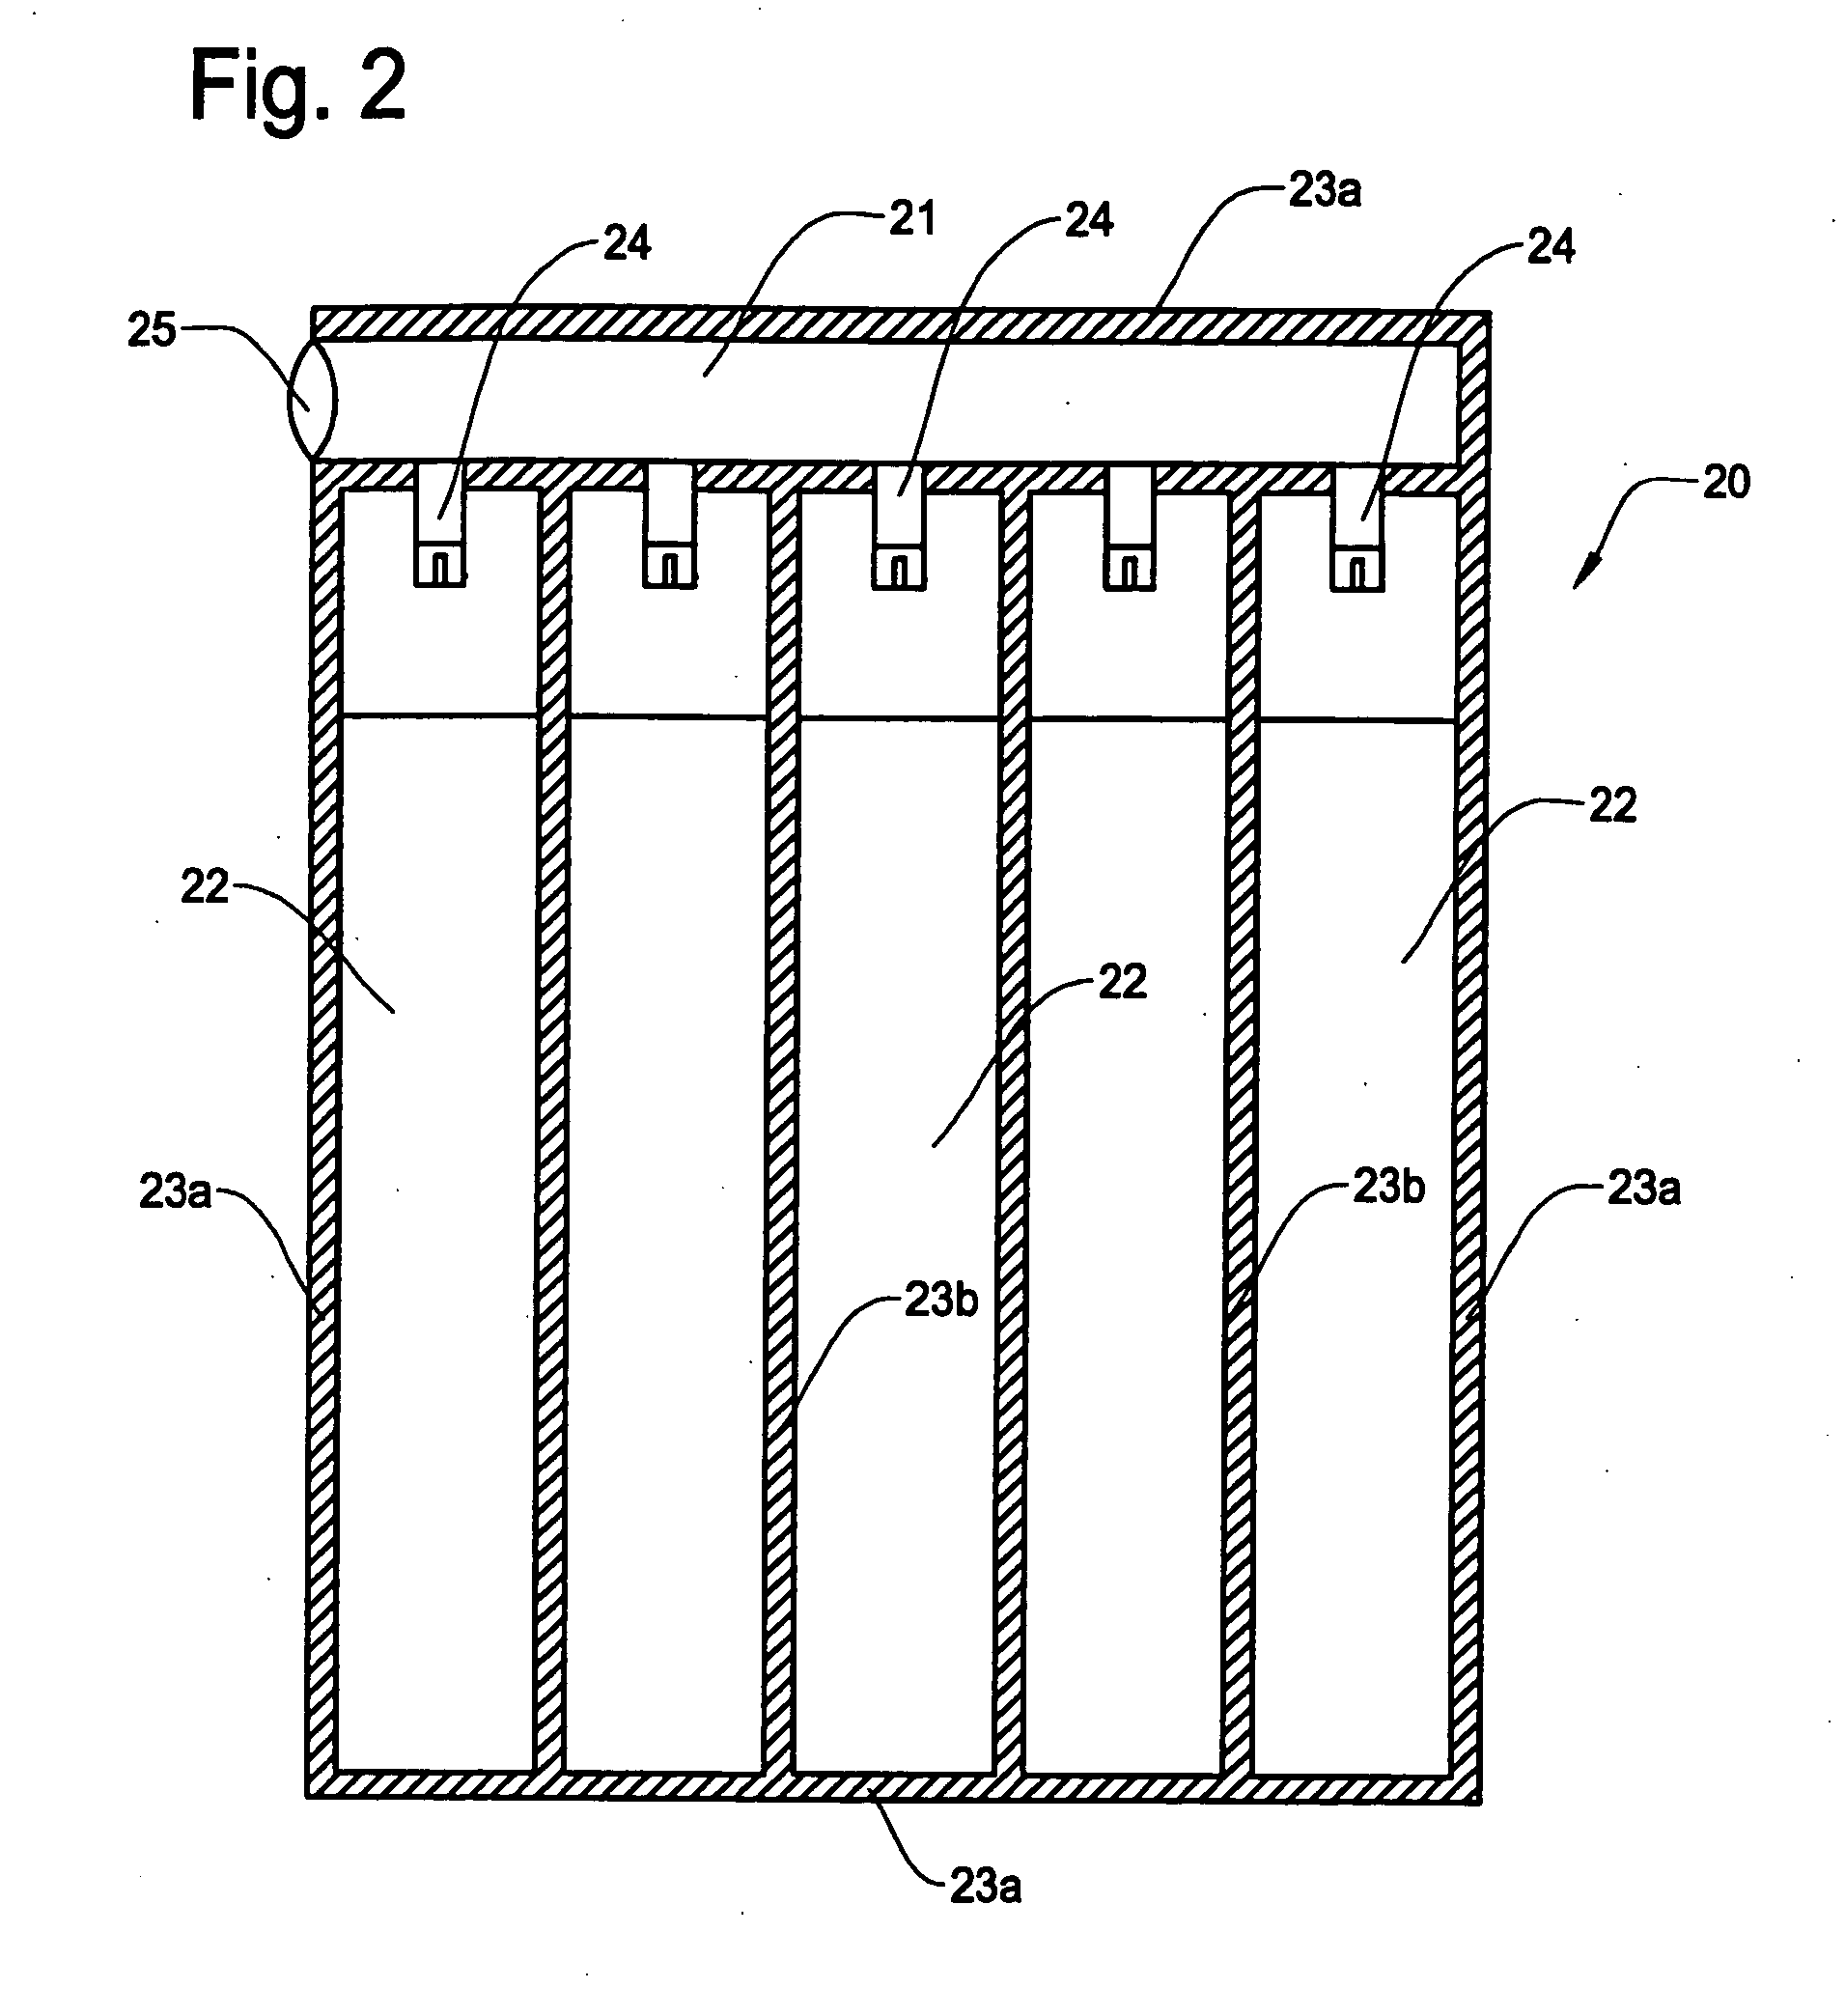 Structure of air-packing device